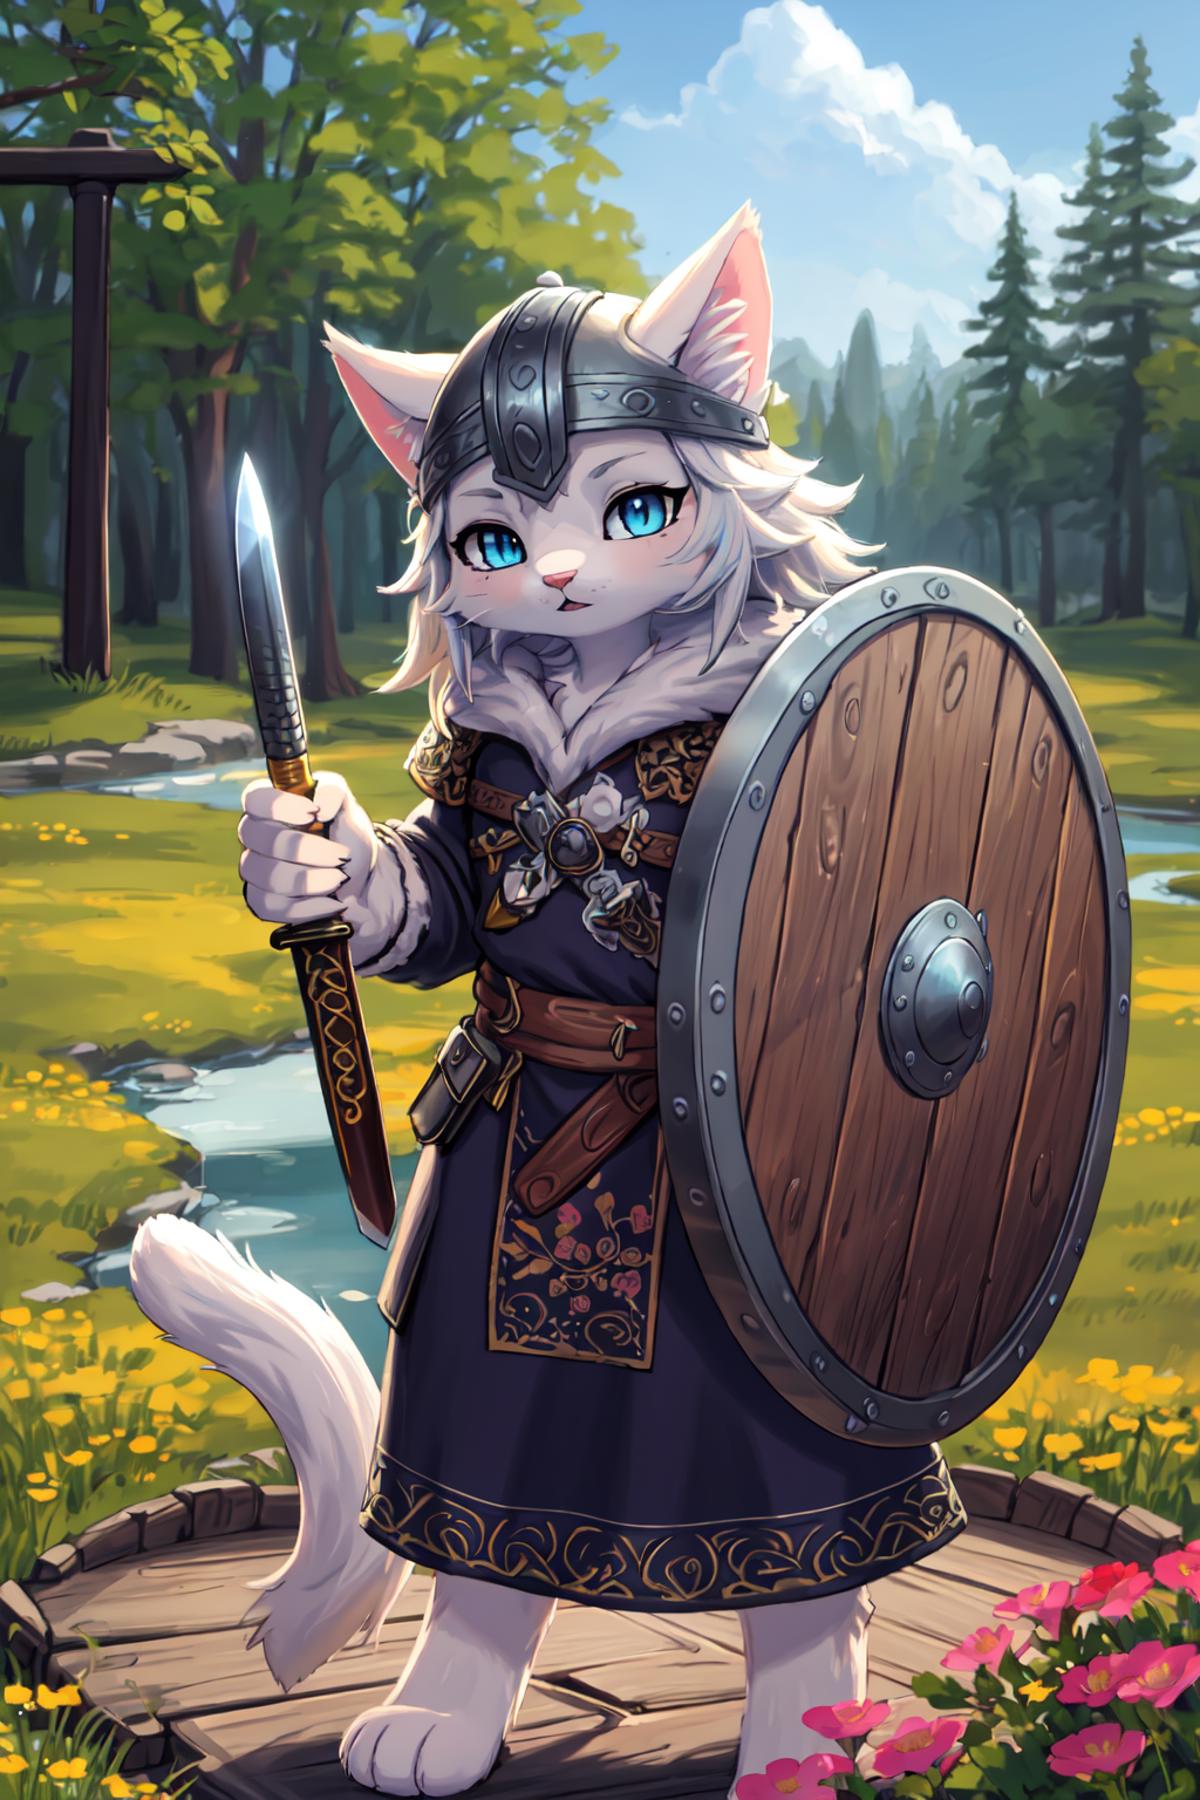 Ancient Viking Clothes image by Chocolemur